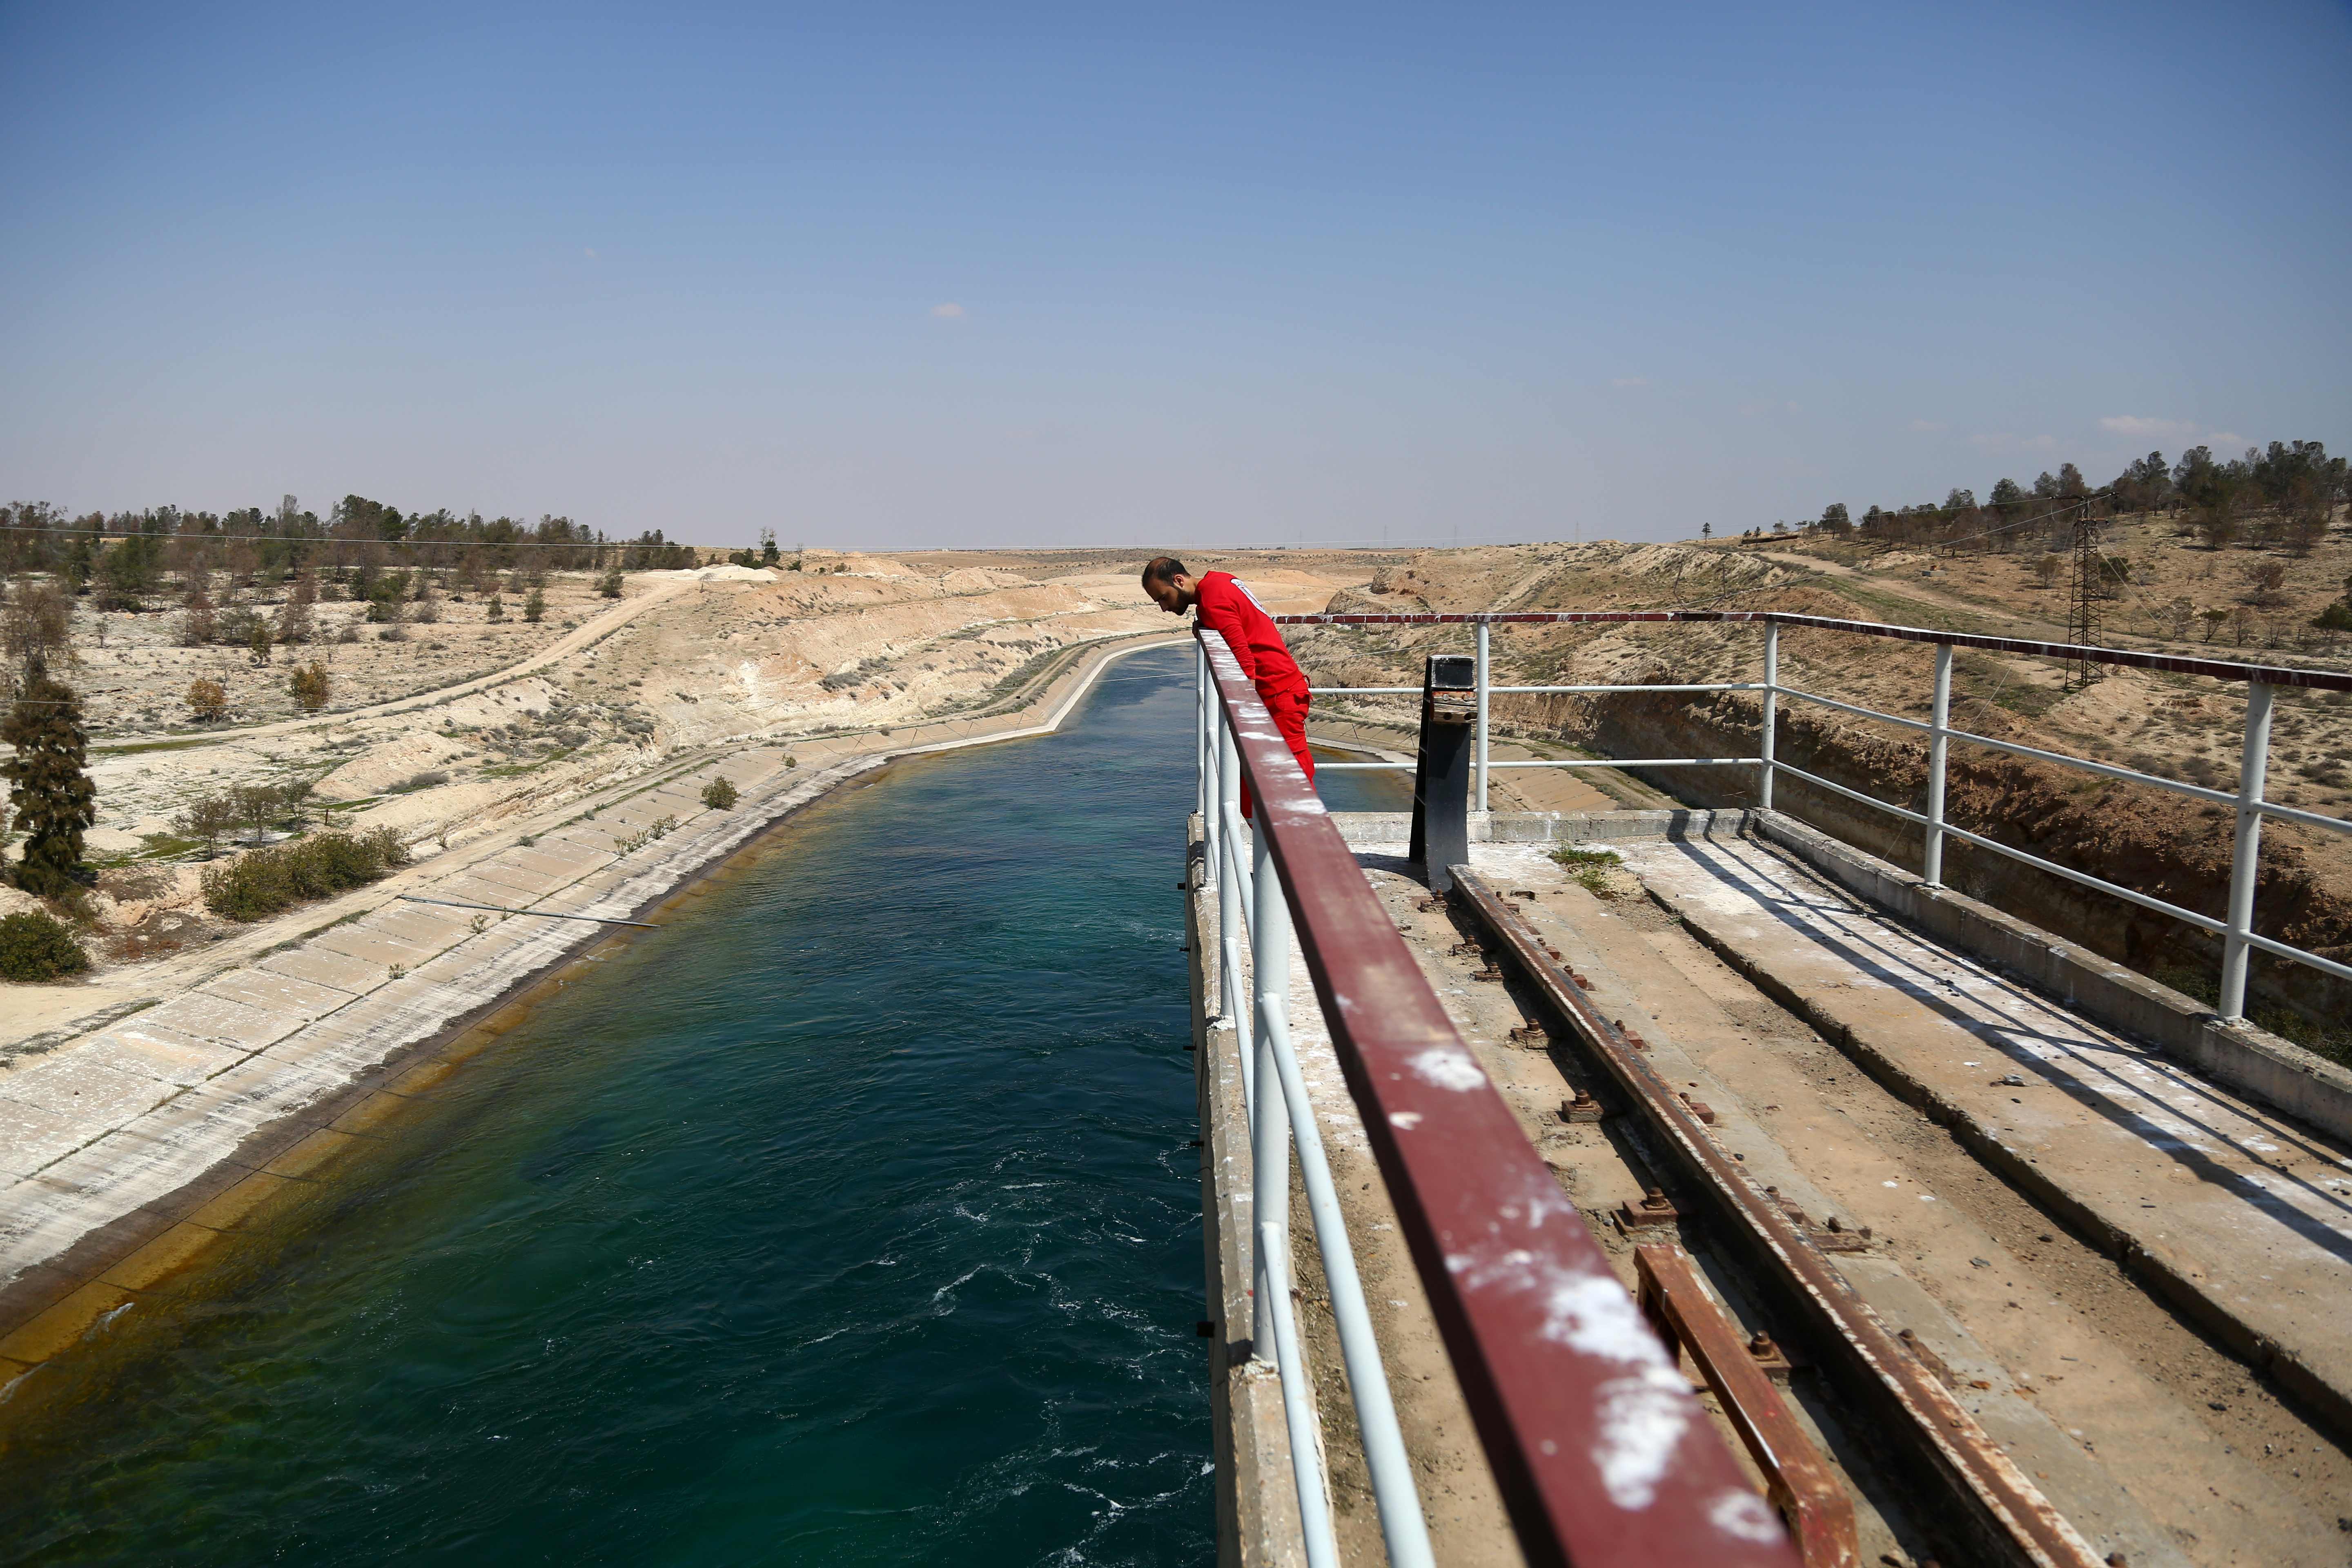 Guns silent as engineers work to ease pressure on Syrian dam